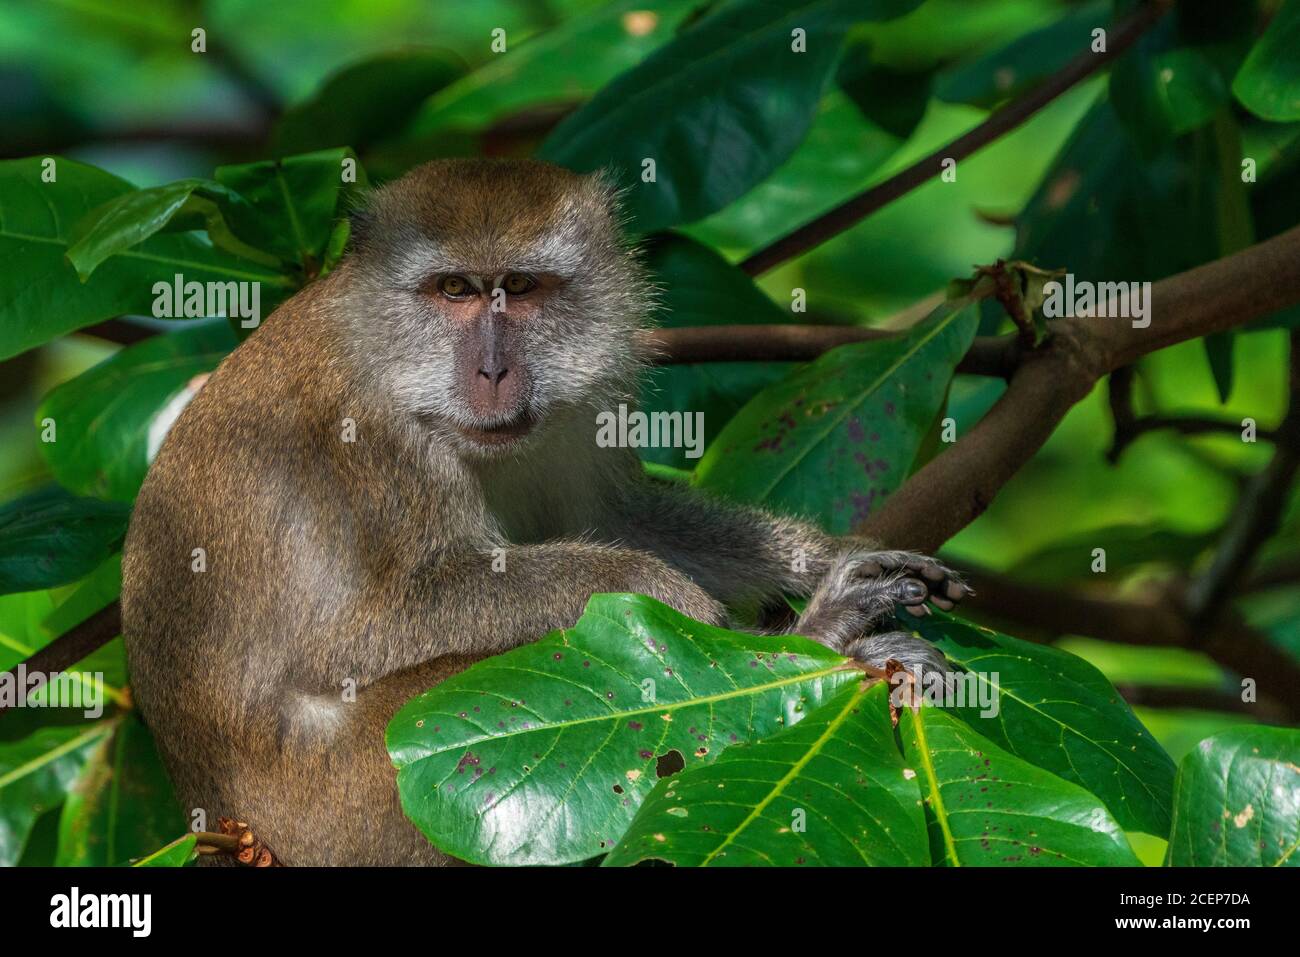 A single long-tailed macaque monkey in Bukit Timah nature reserve,  Singapore Stock Photo - Alamy